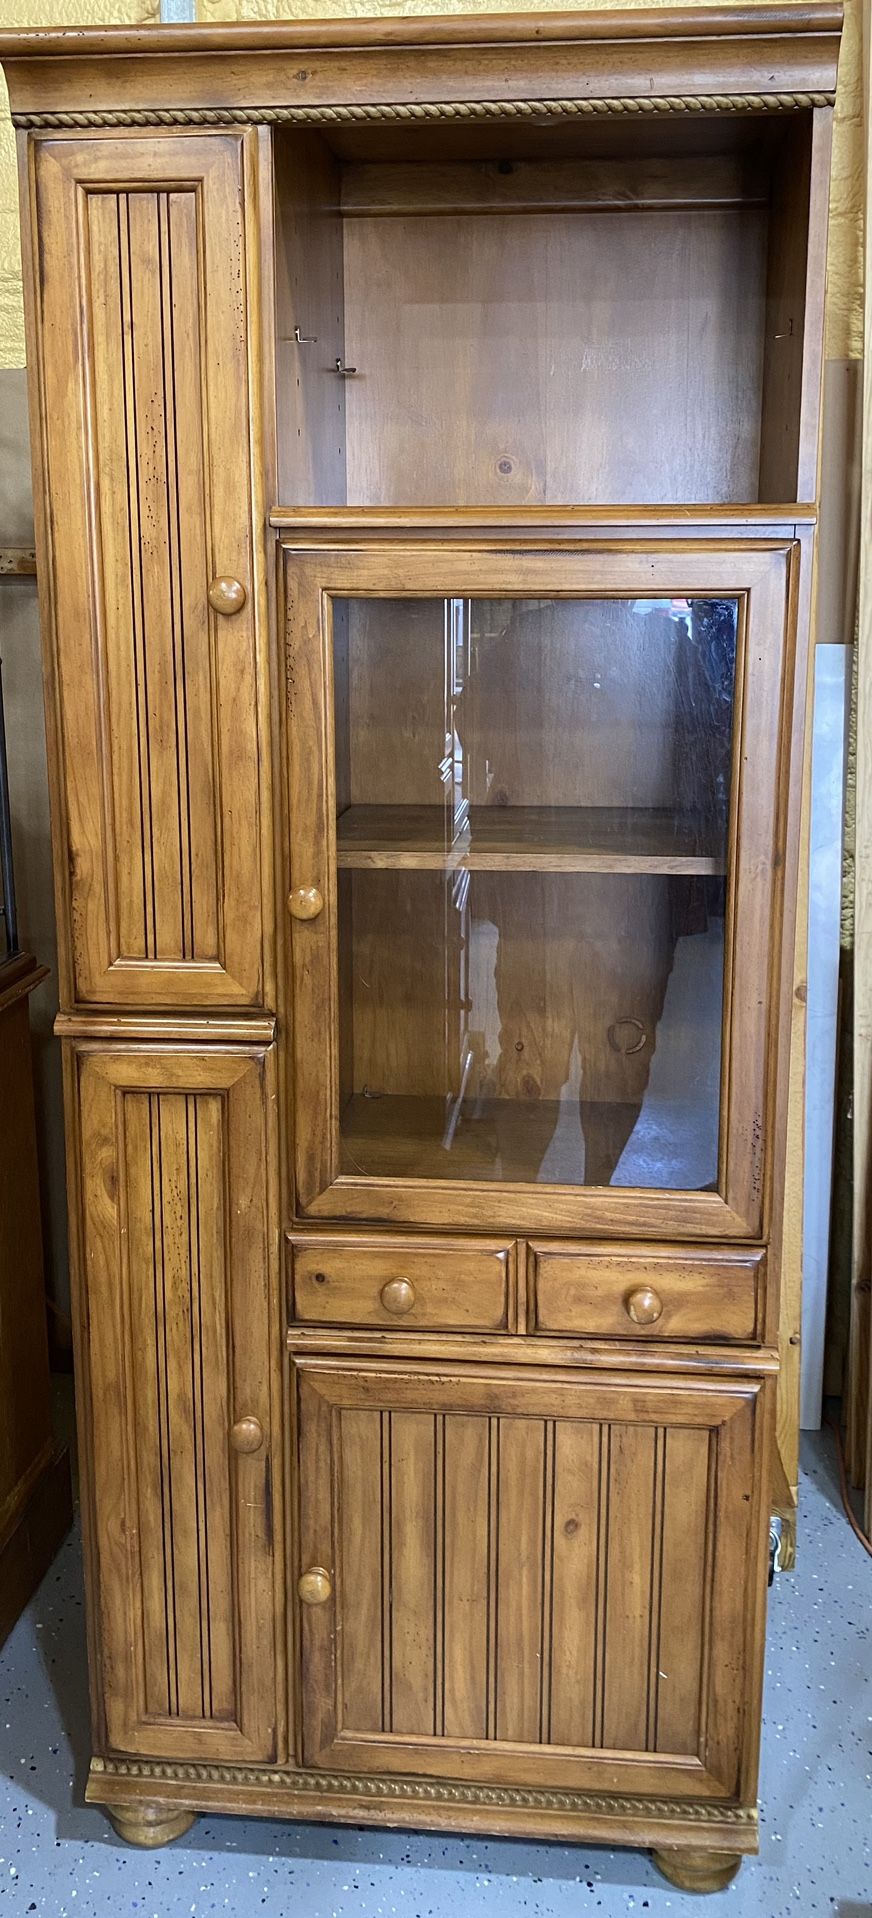 Glass and wood cabinet very sturdy and heavy. Lots of storage.